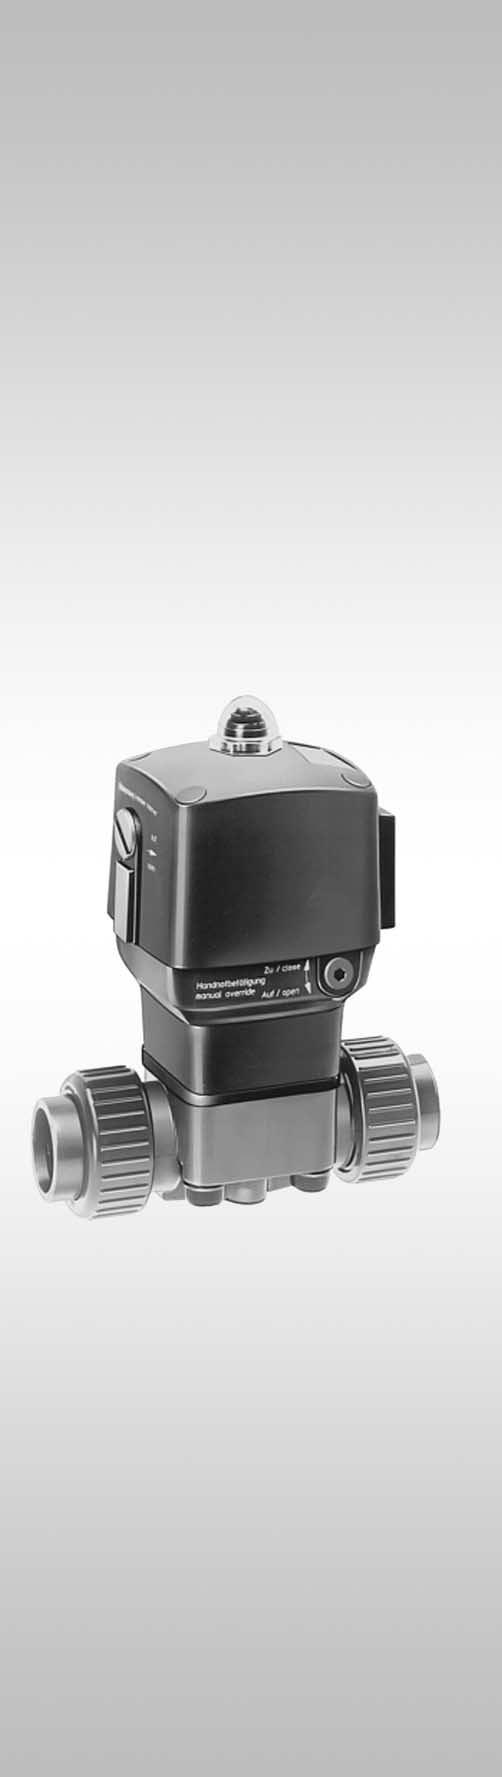 Diaphragm Valve, Plastic Construction The pneumatically operated 2/2 way diaphragm valve GEMÜ is a corrosionresistant all plastic construction.